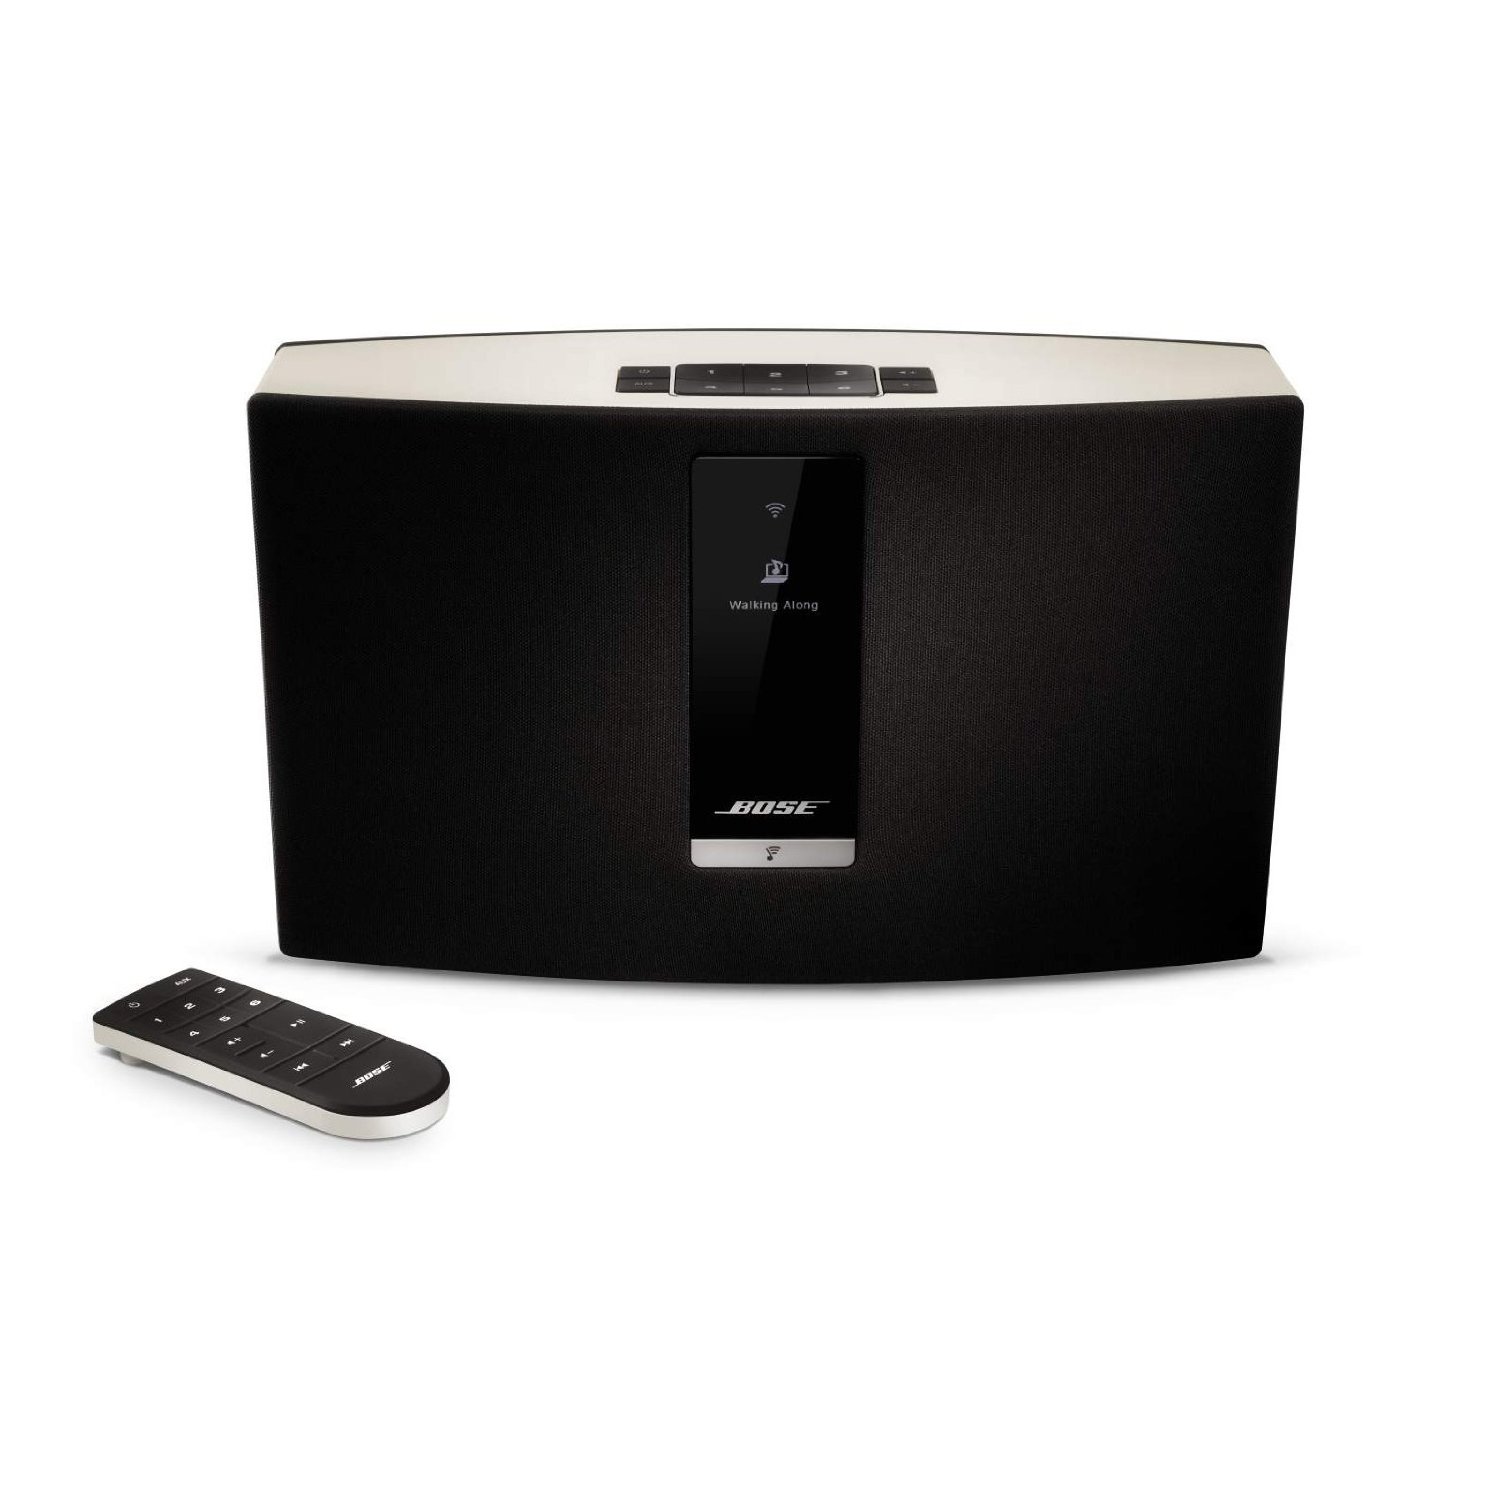 The office repertoire Consent Bose SoundTouch 20 Review | SoundVisionReview